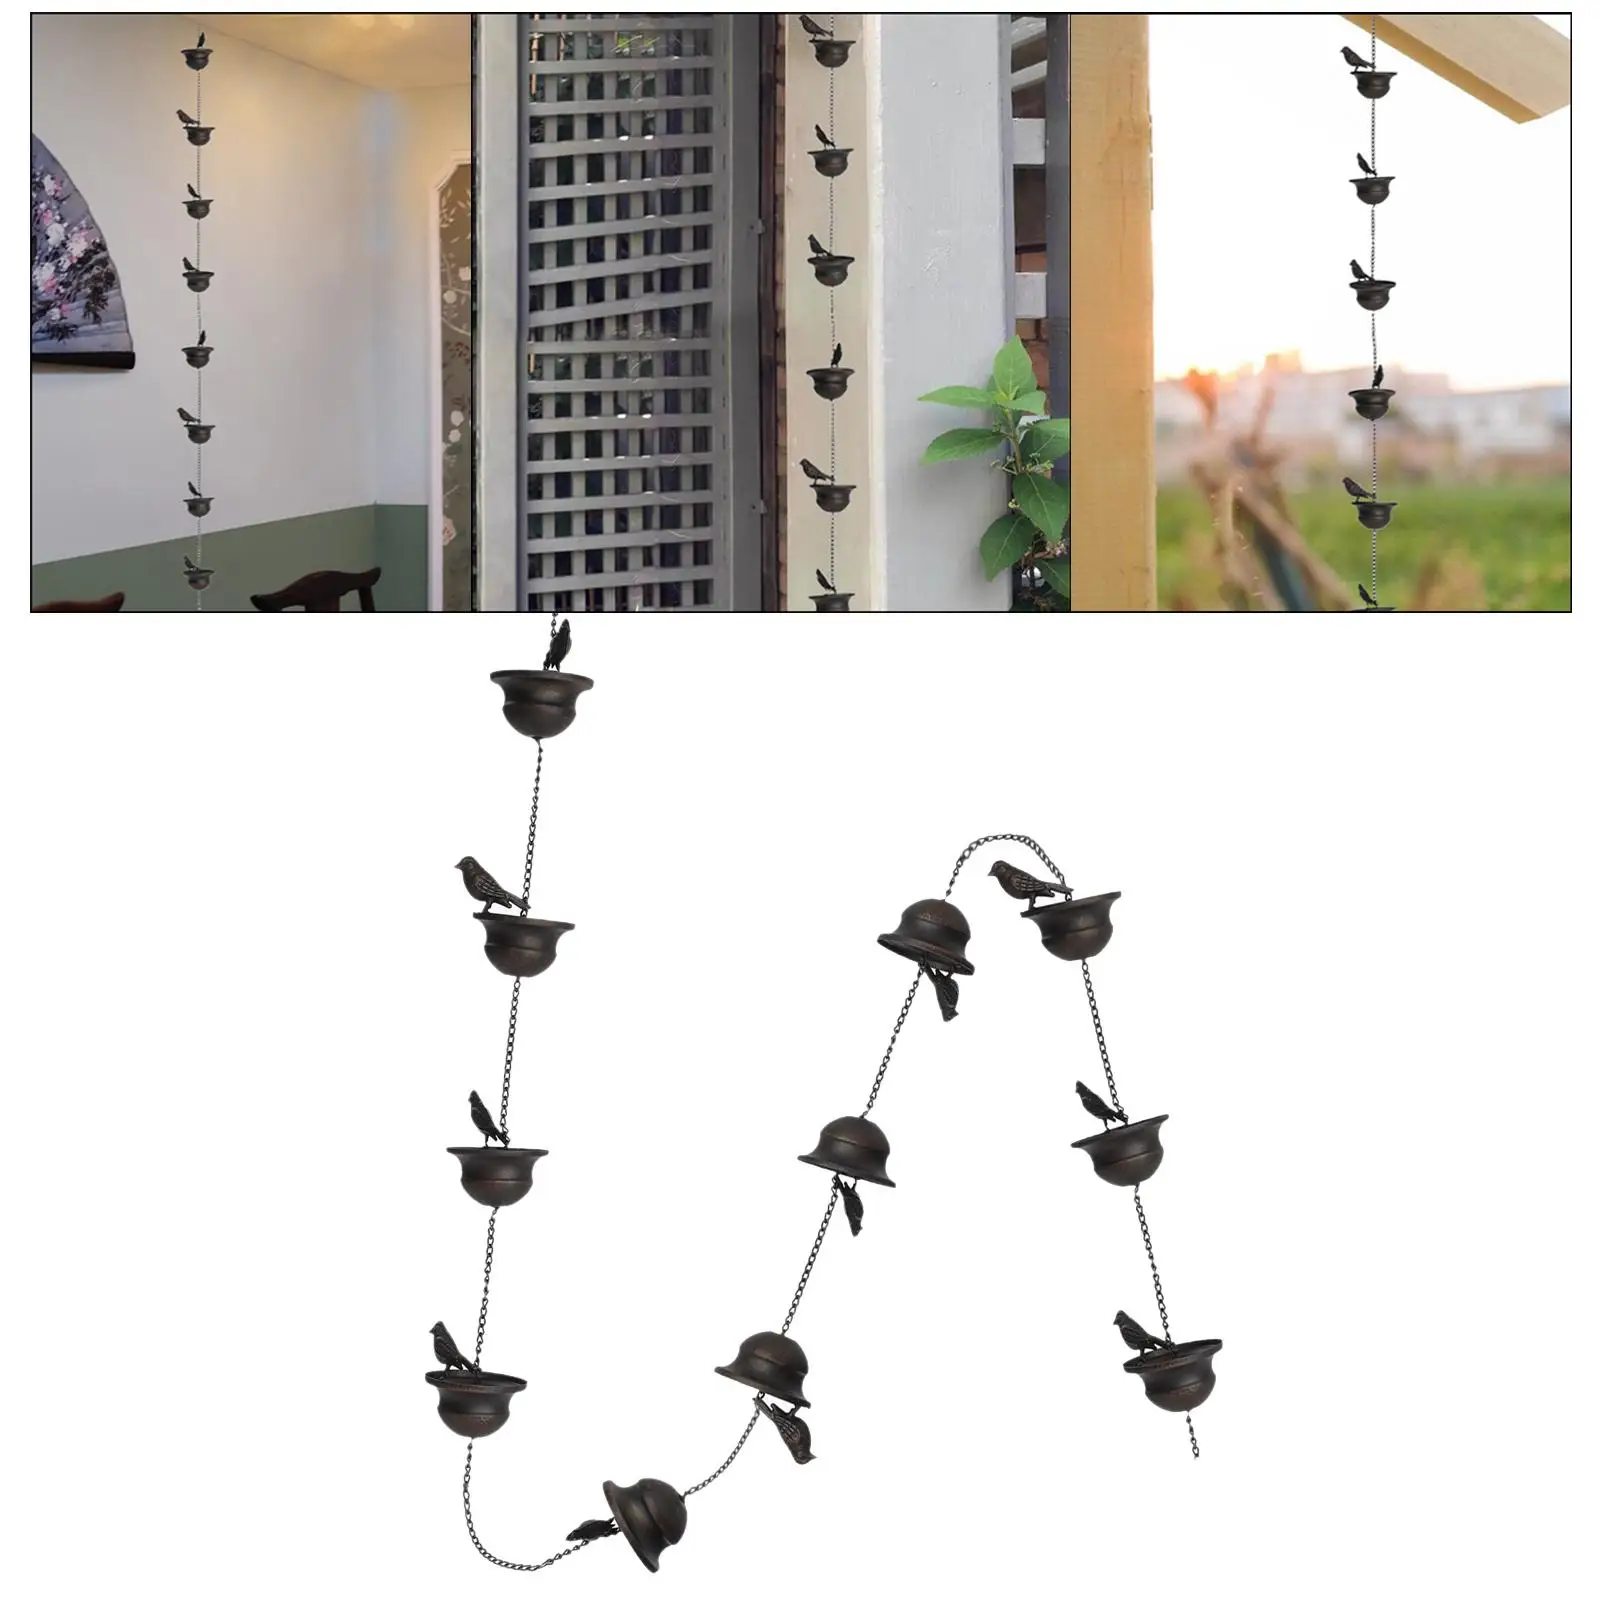 Bird Rain Chains for Gutters Replacement Downspouts Rain Collector Cups 94.5inch for Backyard Roofs Awnings Sheds Divert Water